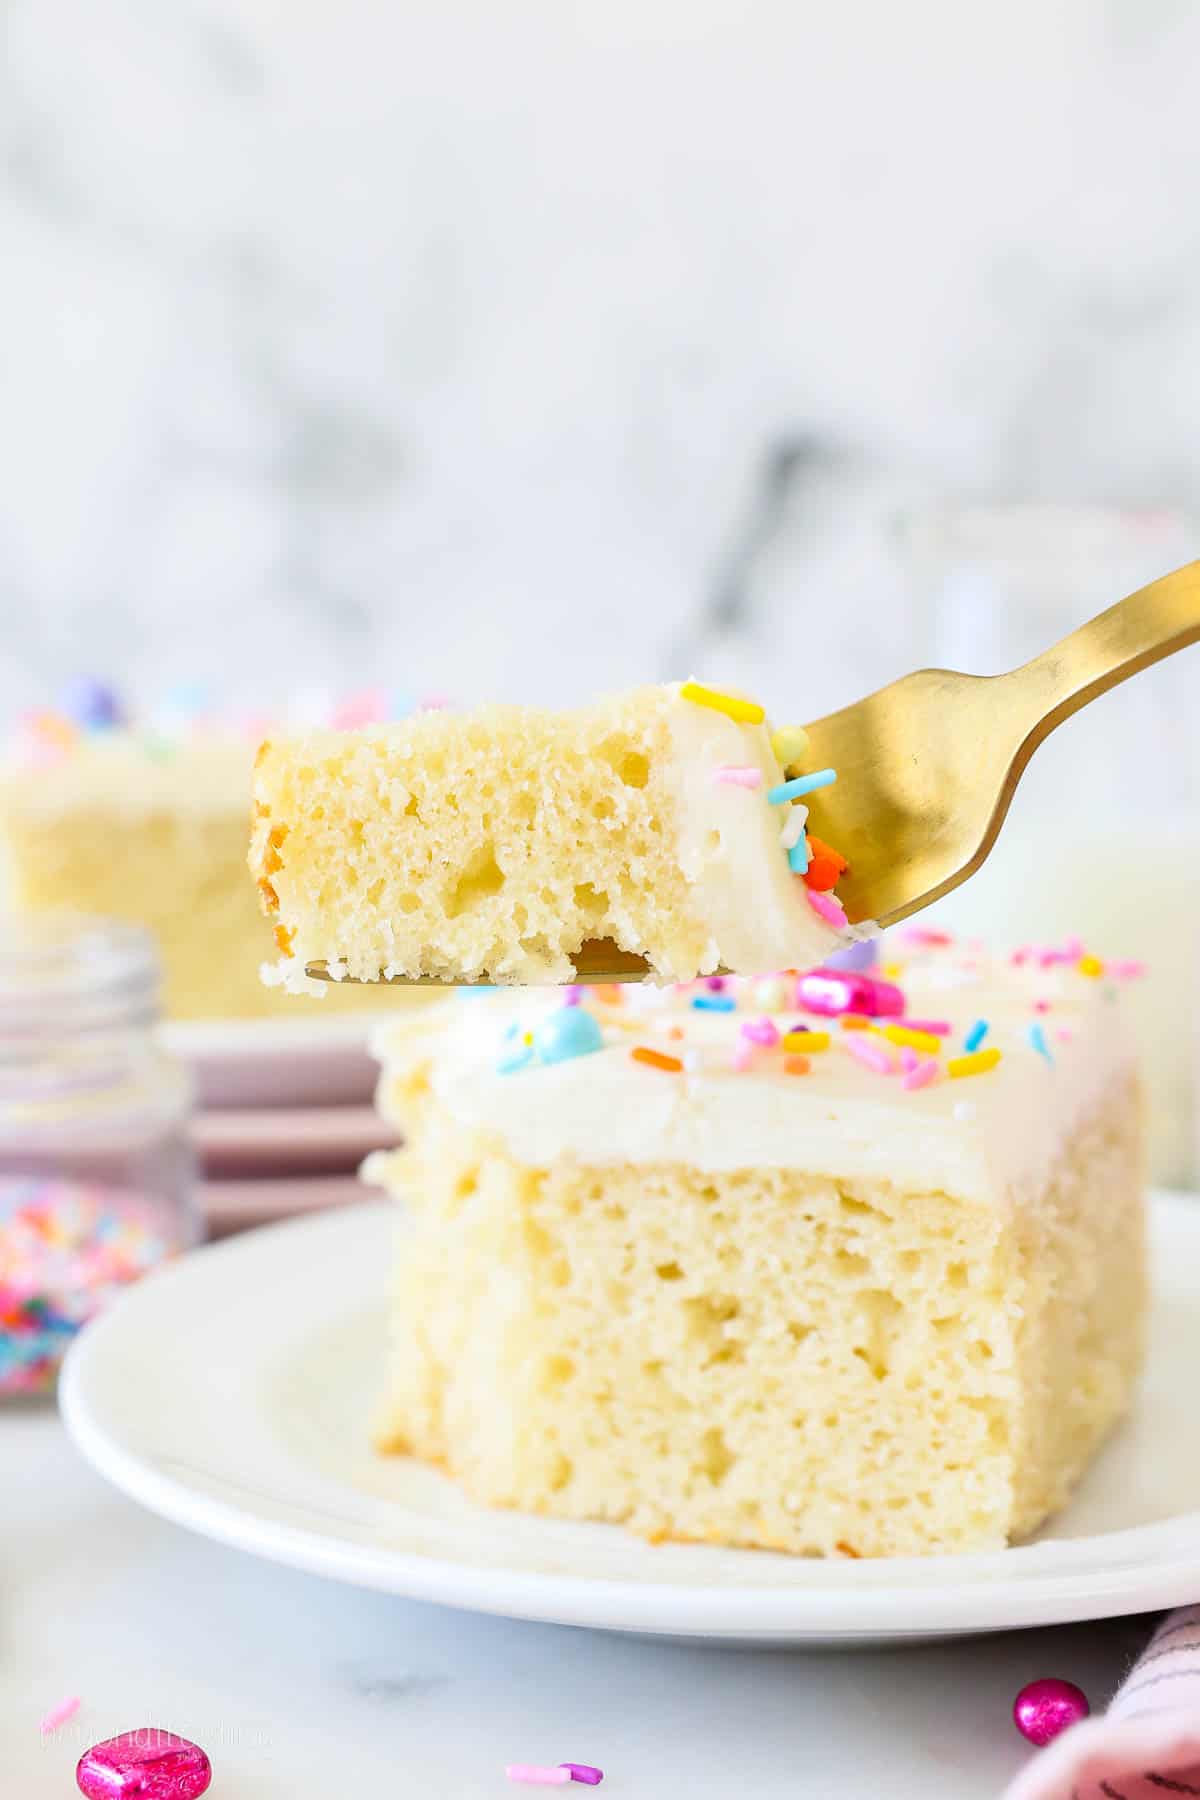 A forkful of vanilla cake held up in front of a slice of frosted cake garnished with rainbow sprinkles.